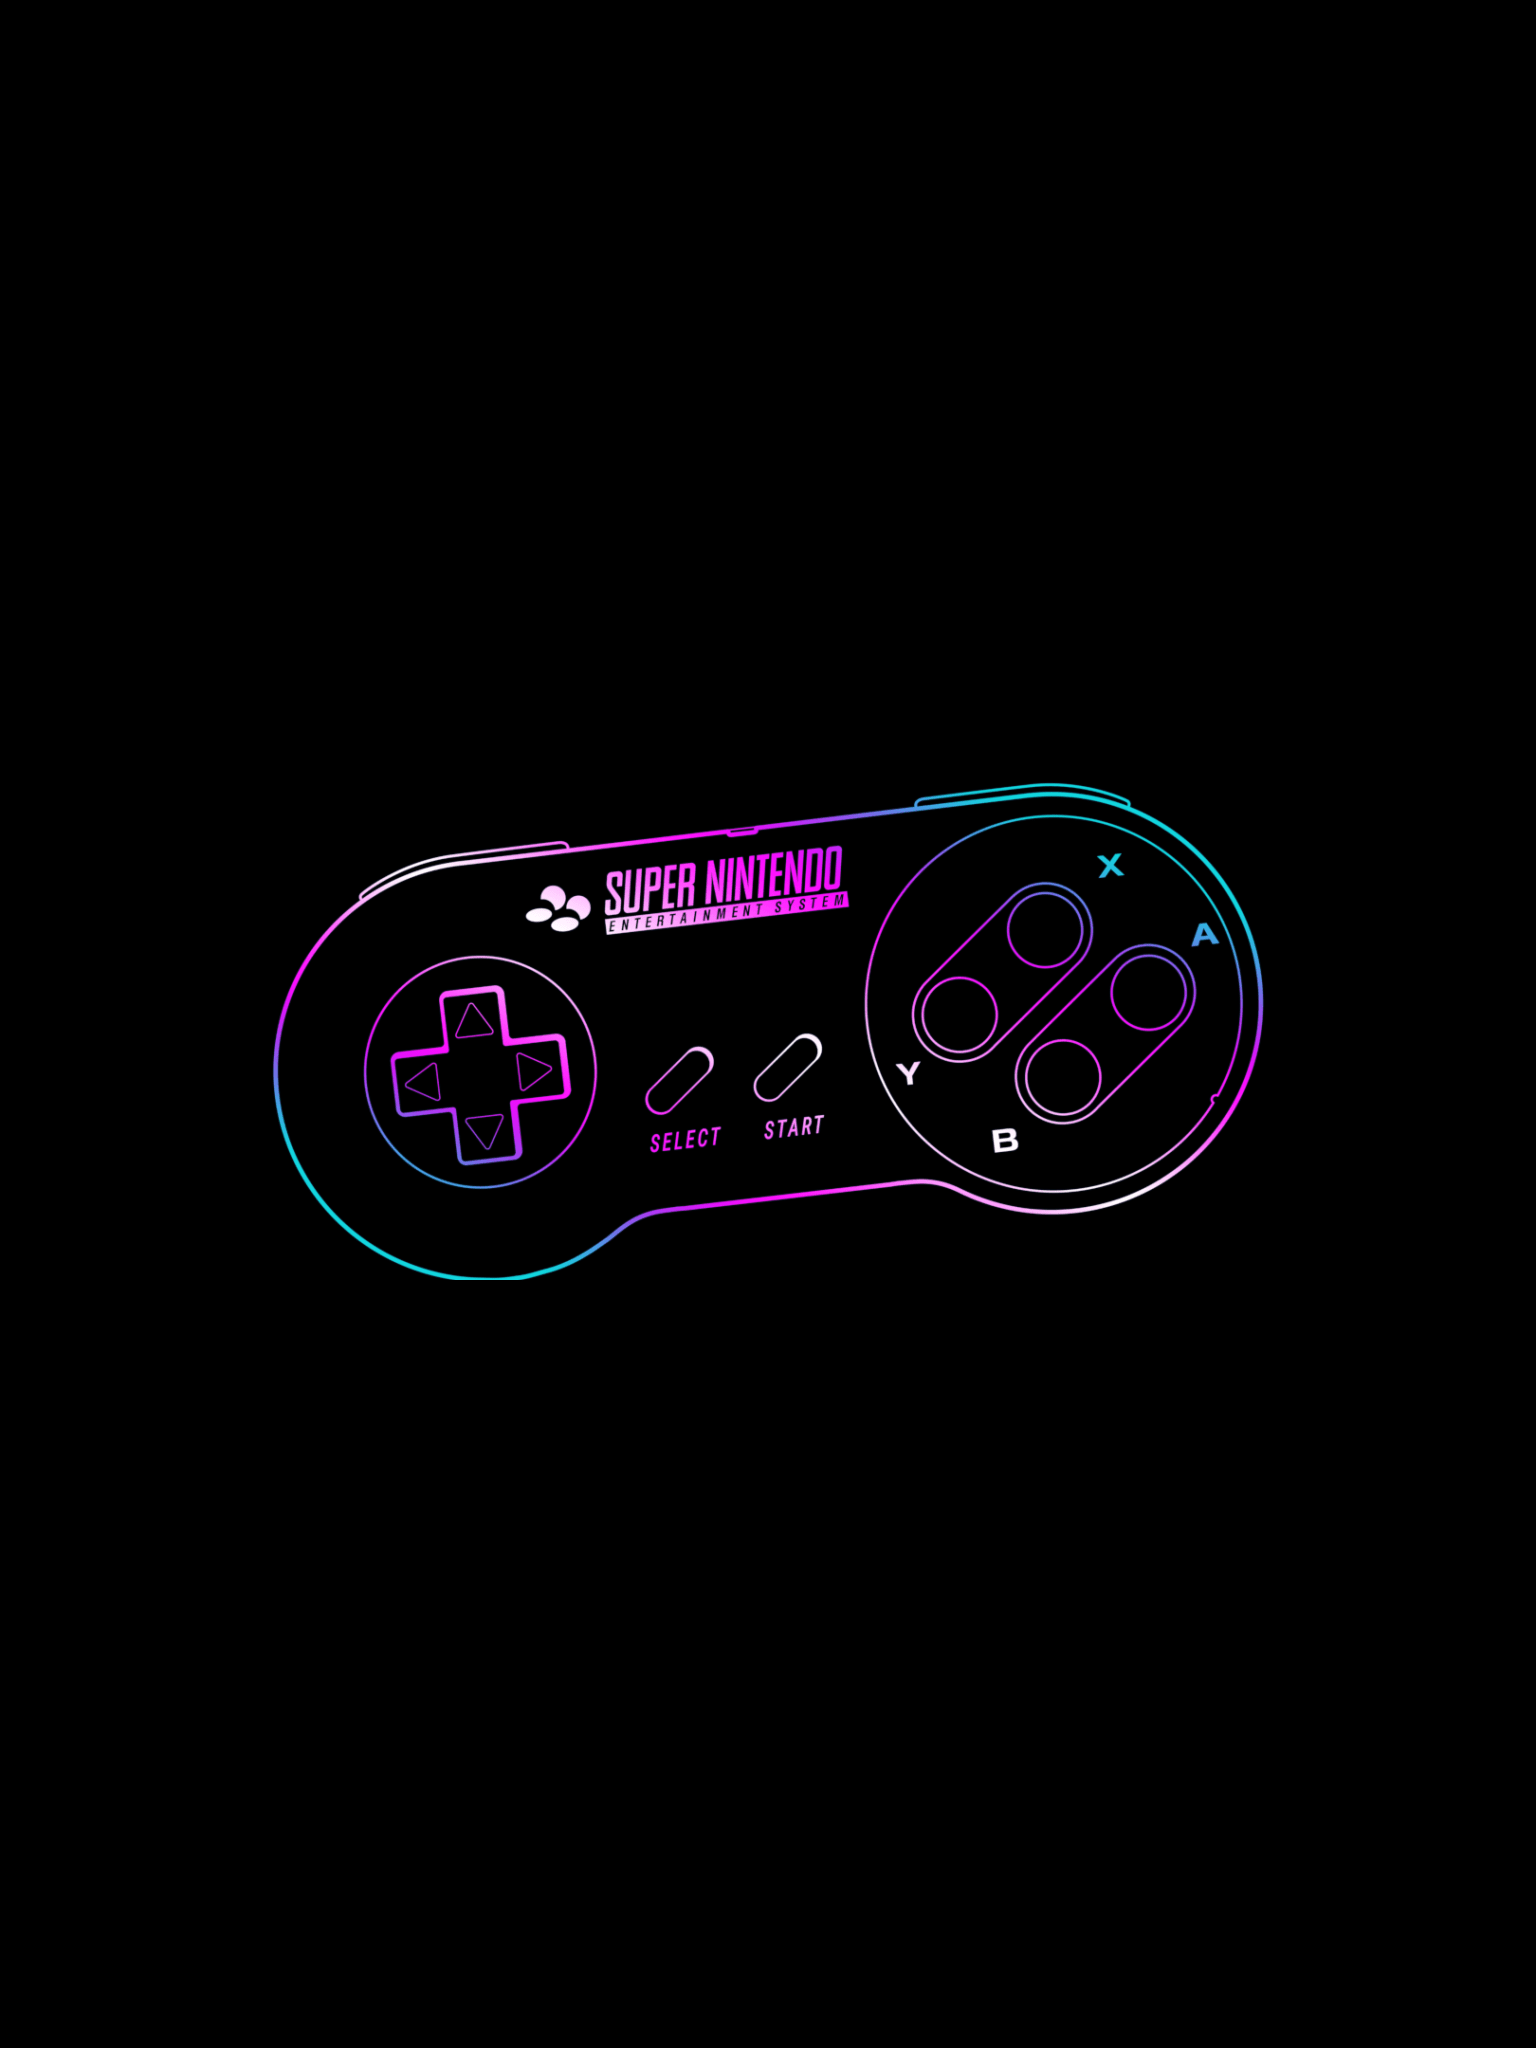 Super Nintendo controller in purple and blue on a black background - Nintendo